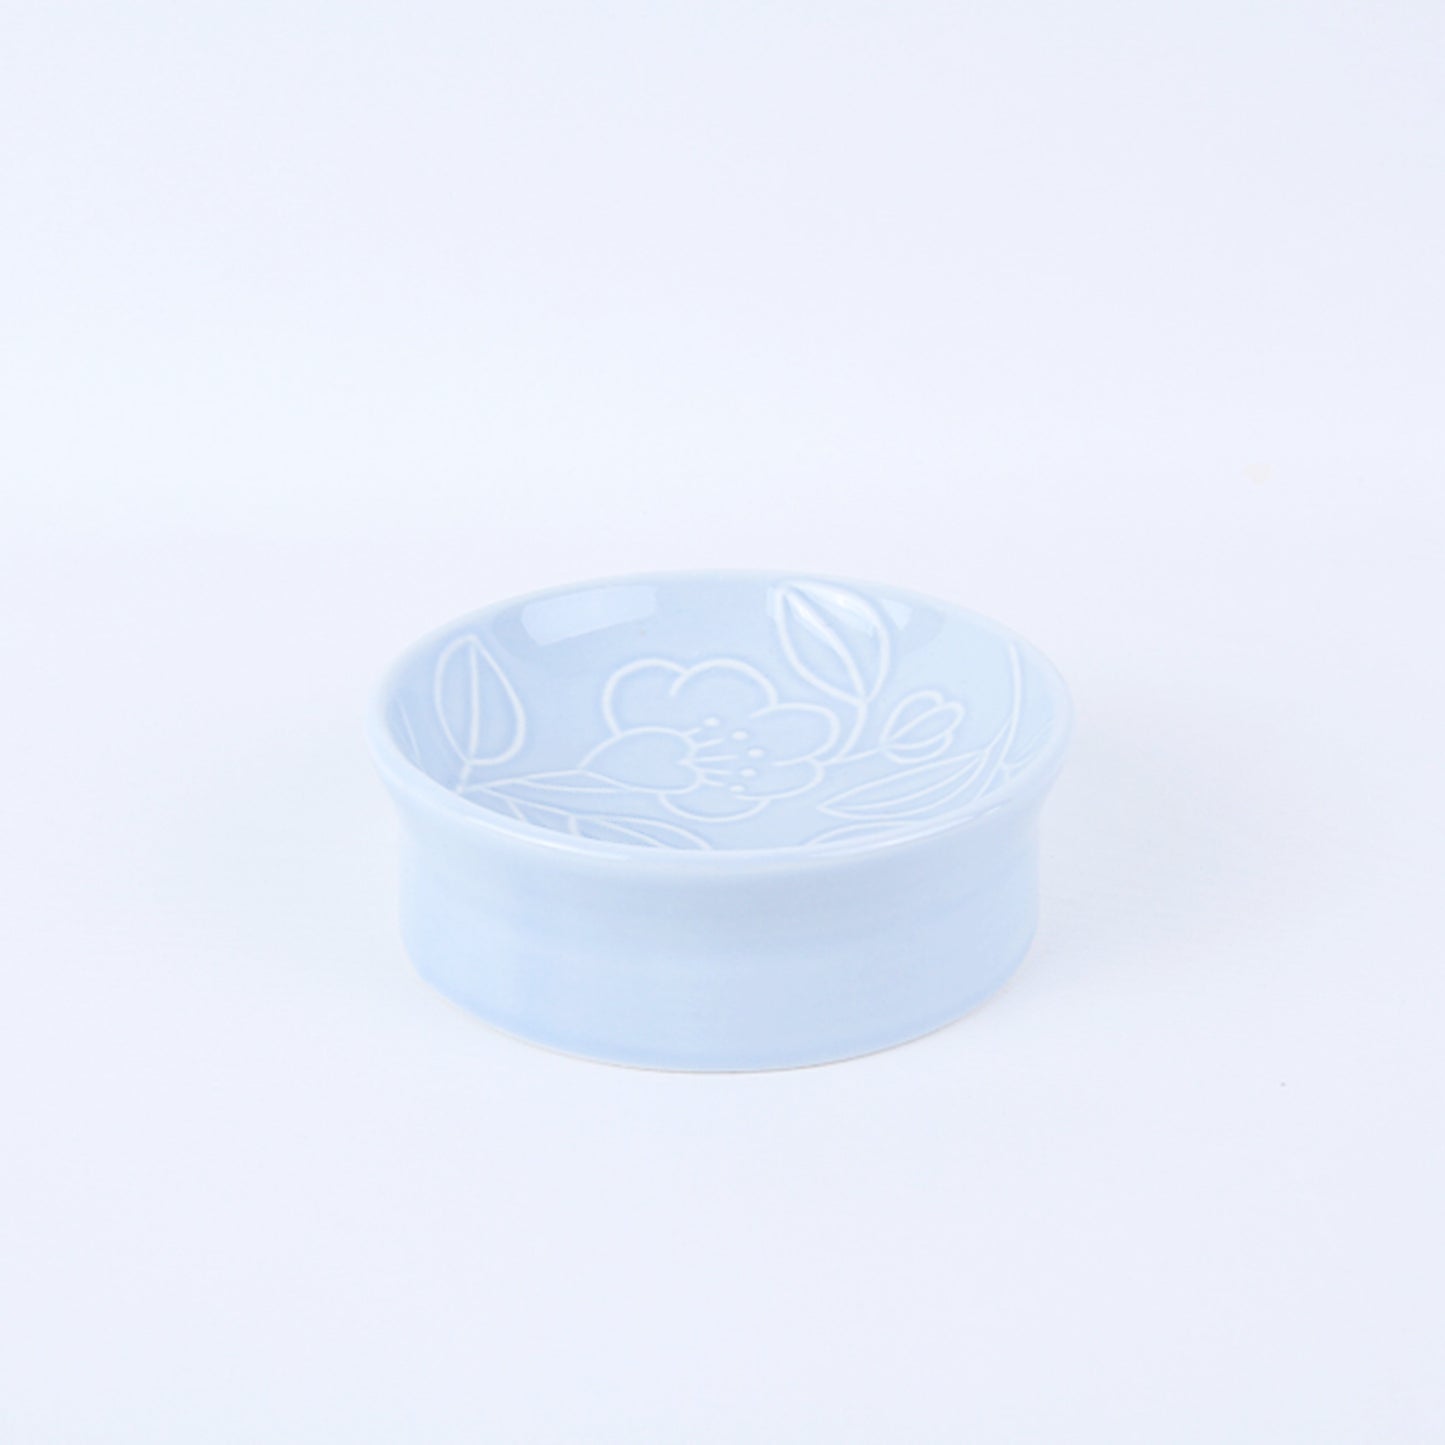 Refreshing Height Round Dish 116mm (Sky Blue Colors) 𝟐𝟎% 𝐎𝐅𝐅